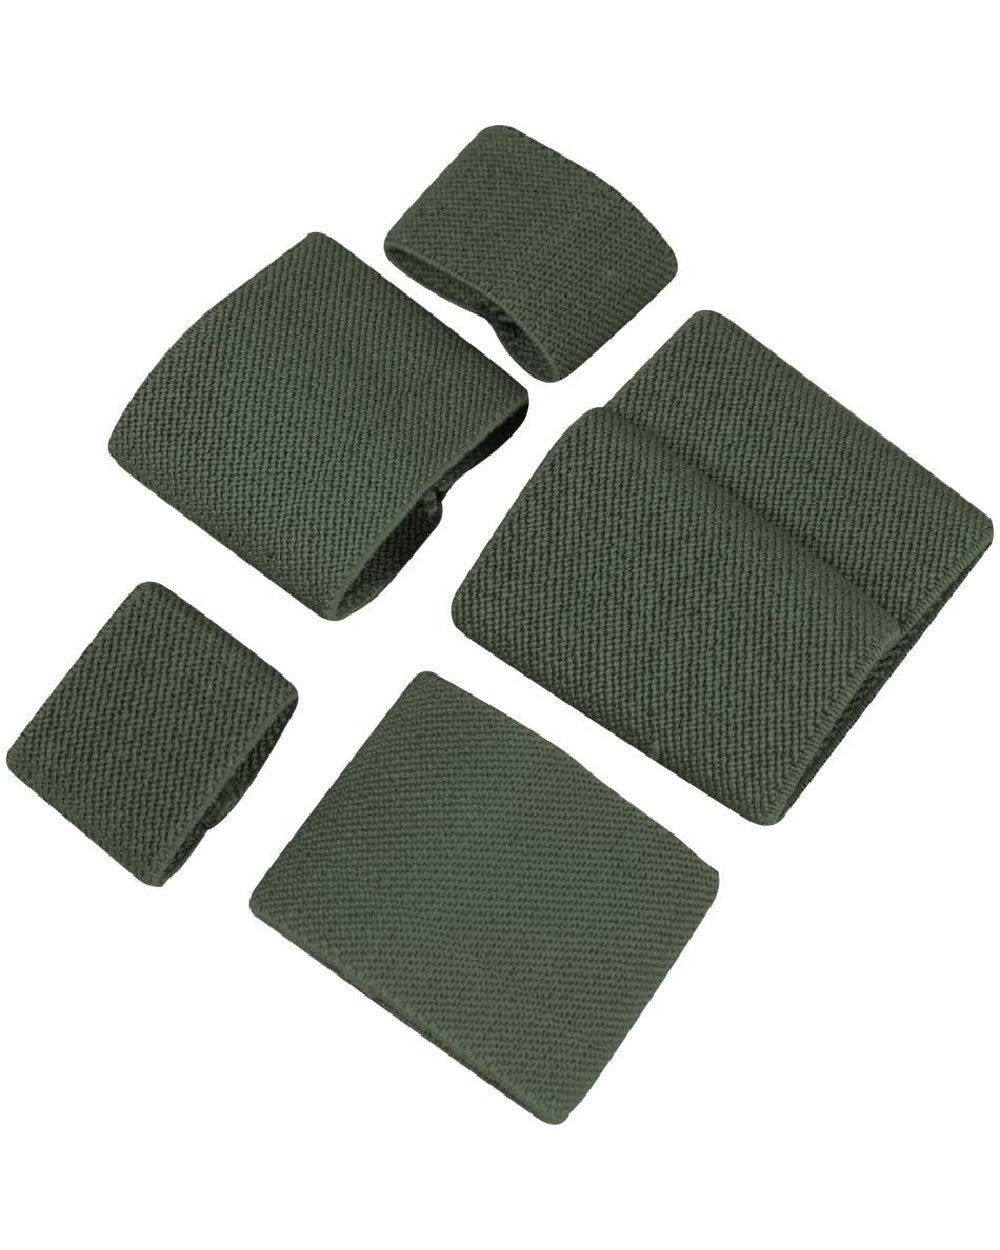 Viper Buckle Tidy Set in Green 